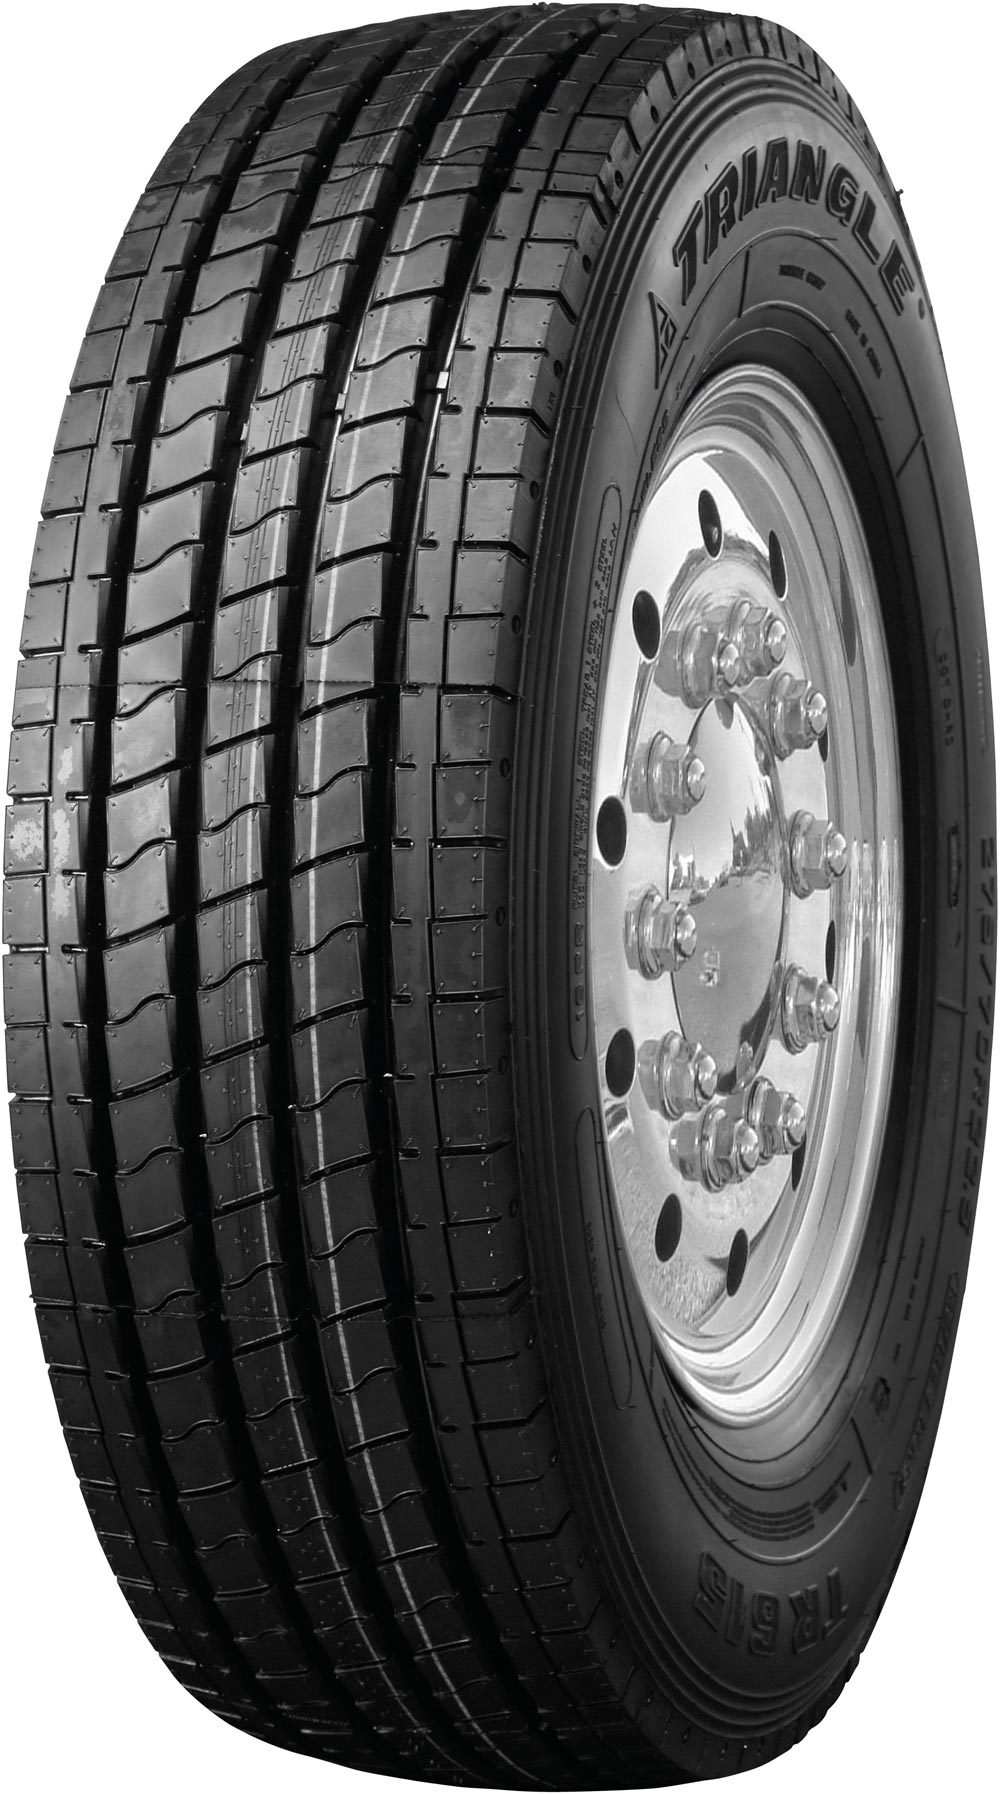 product_type-heavy_tires Triangle TR615 16PR 11 R22.5 146J